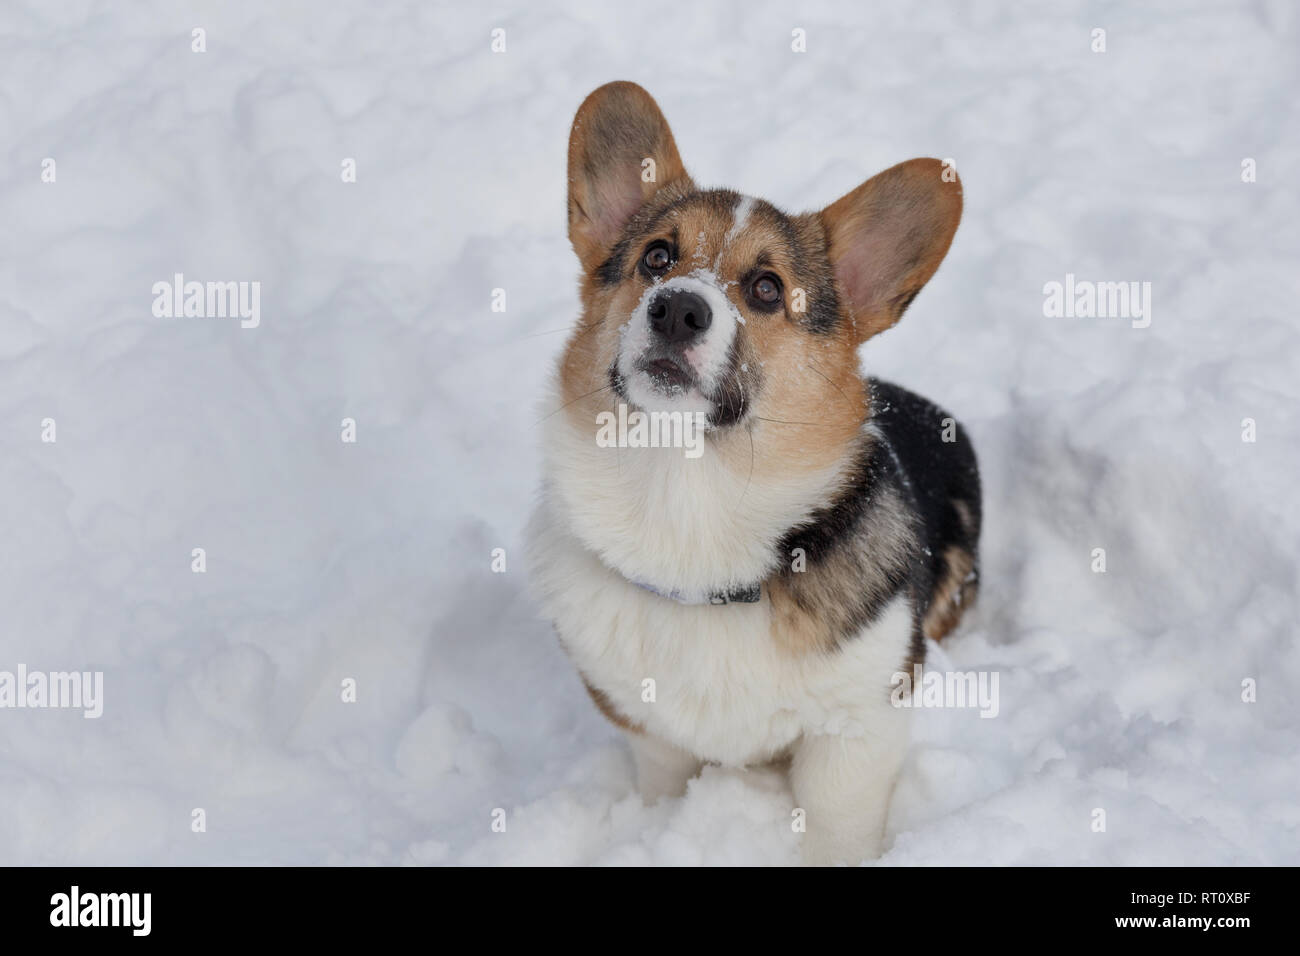 Fawn and black puppy of pembroke welsh corgi is looking at his owner. Pet animals. Purebred dog. Stock Photo